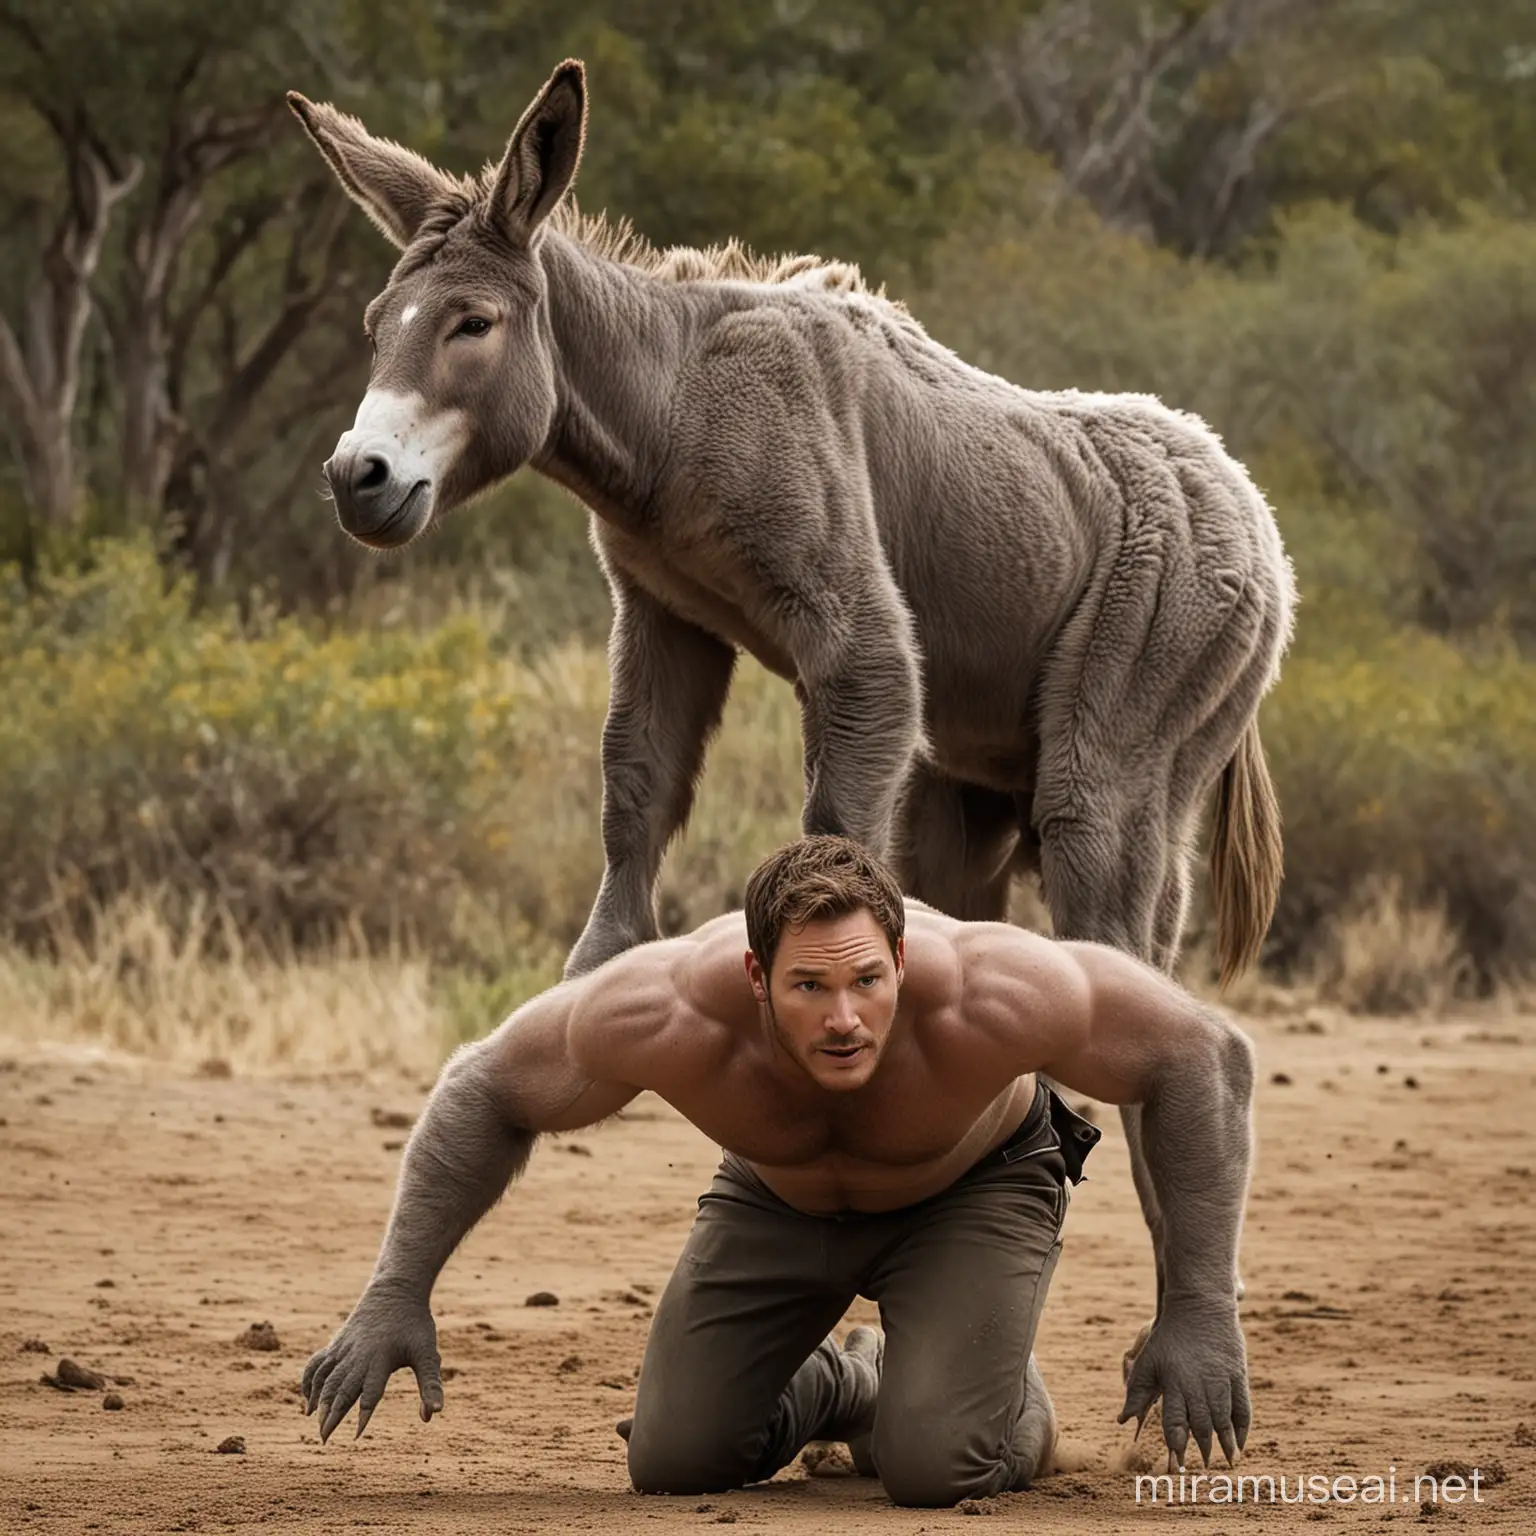 Chris Pratt Transforming into Donkey Hybrid with Realistic Features and Comical Braying